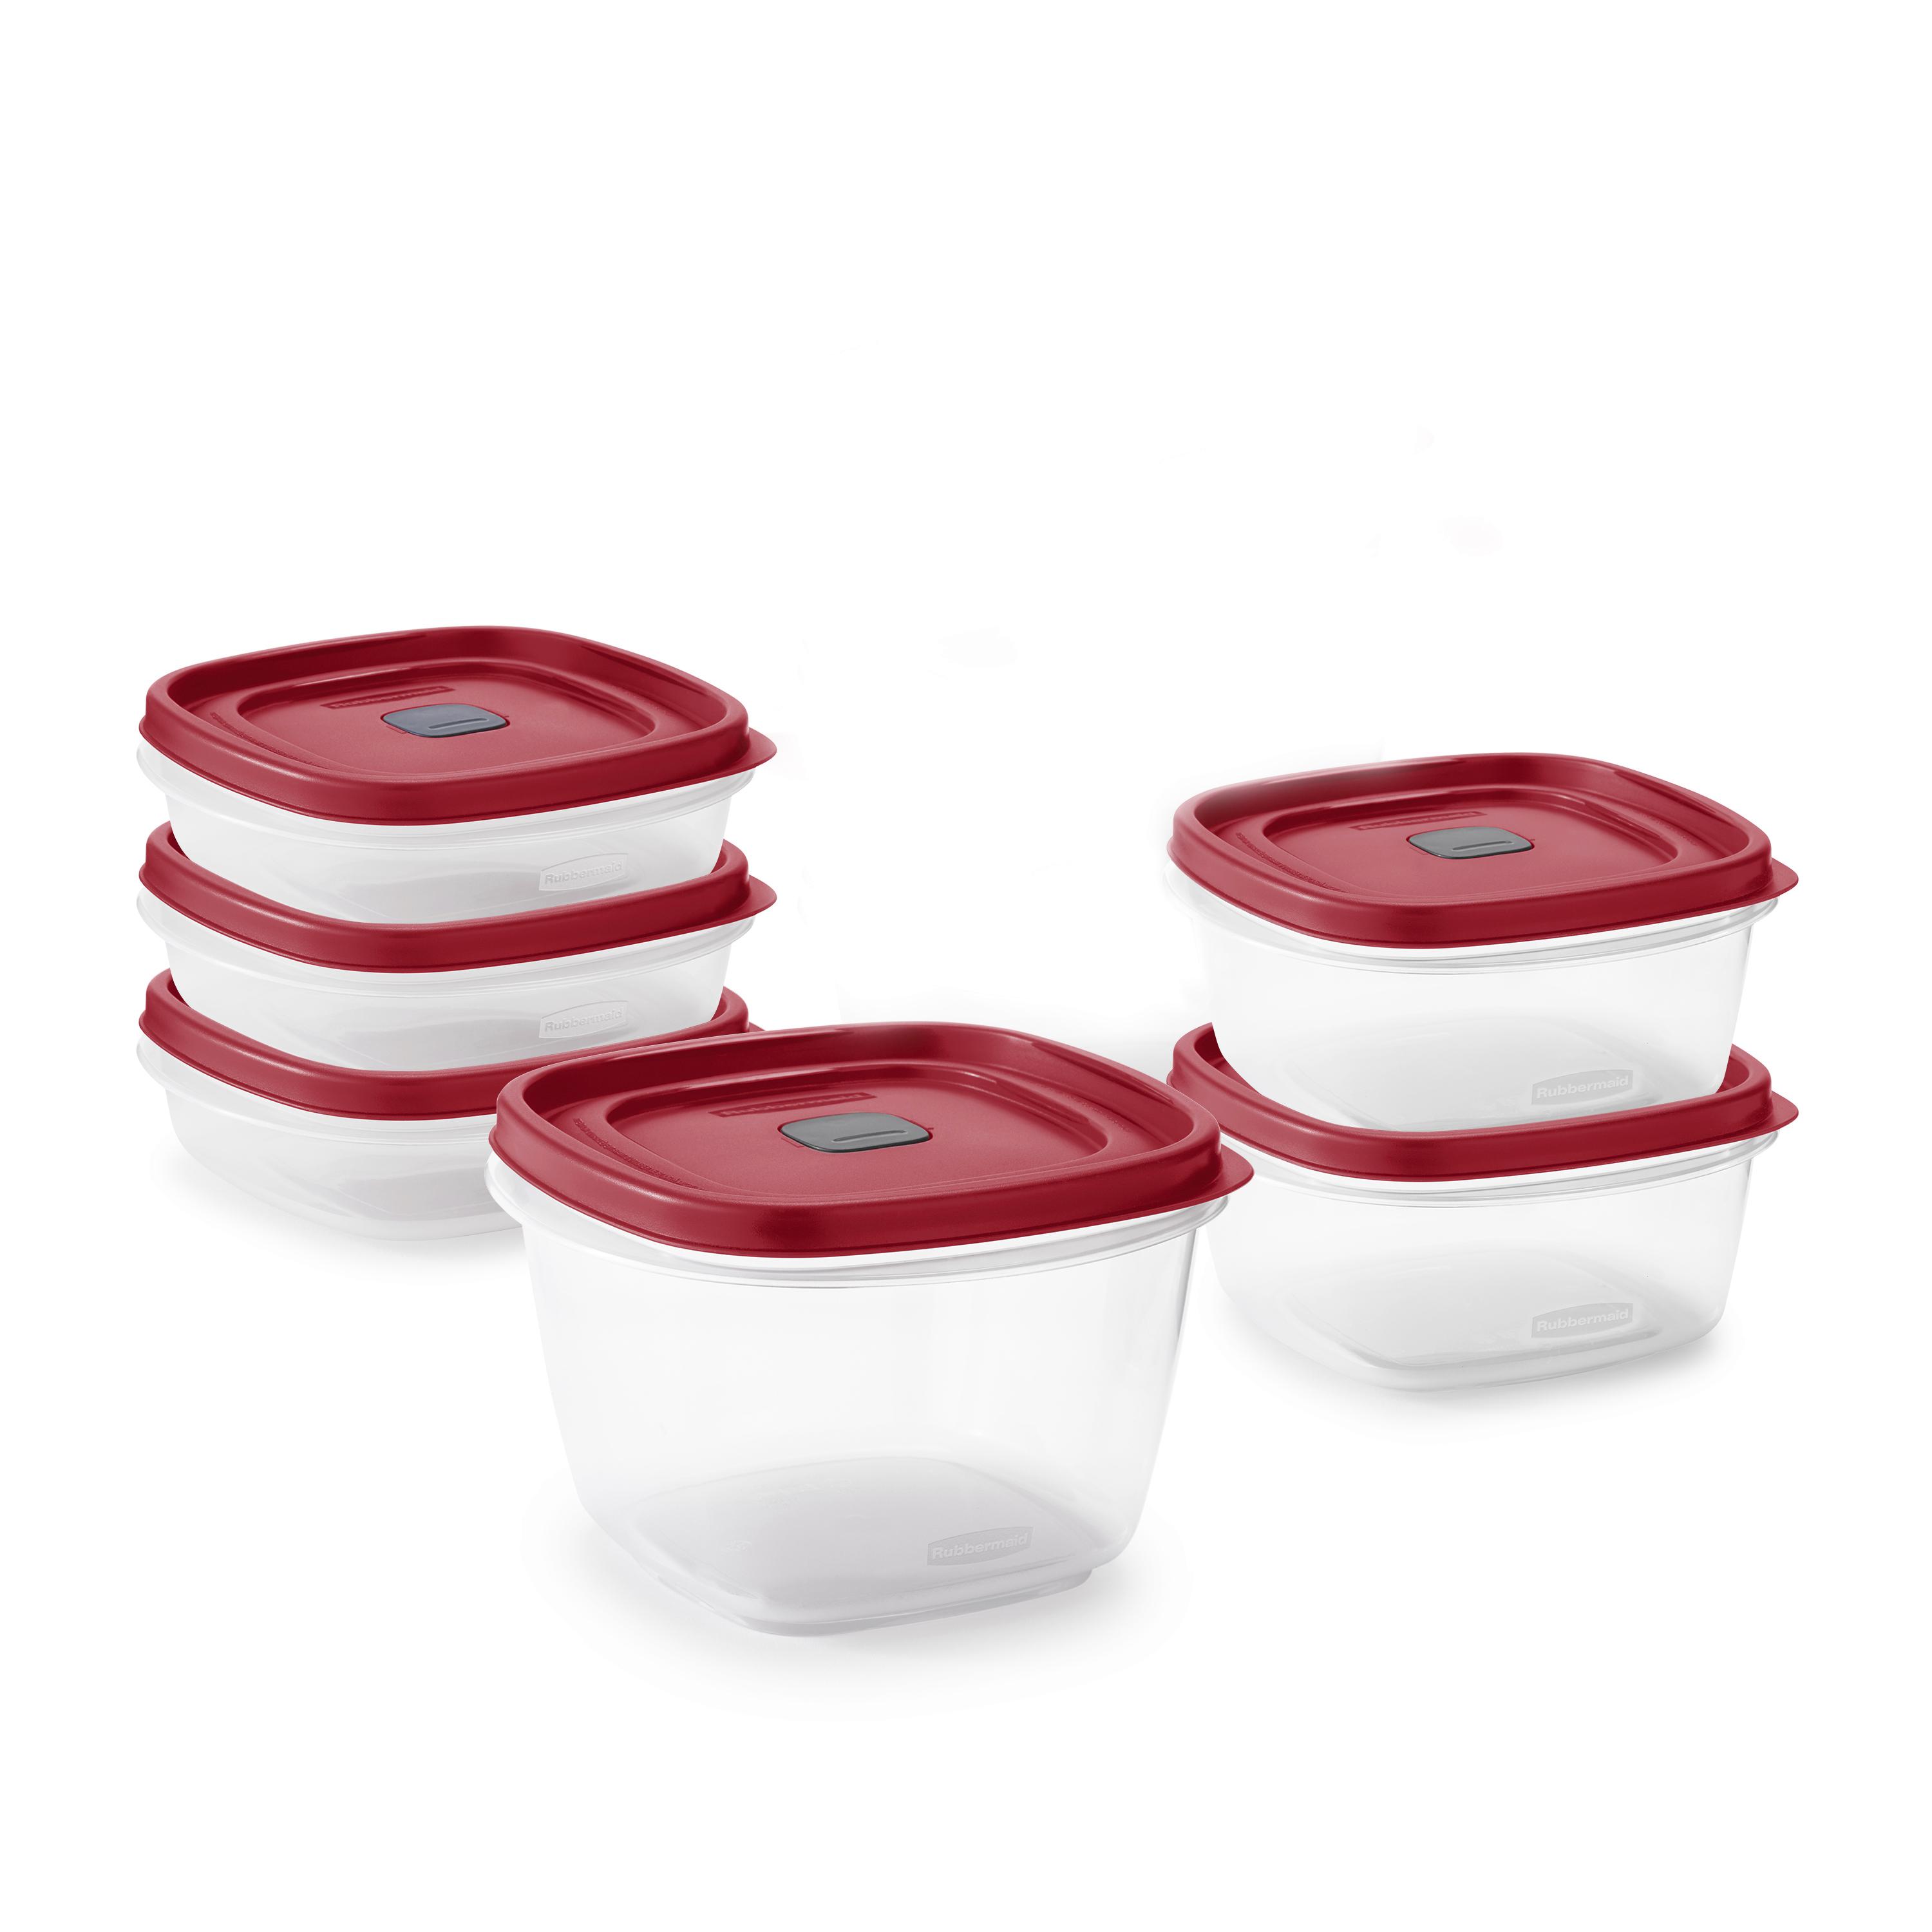 Rubbermaid Easy Find Lids Container & Lid Extra Clear 3 Cup